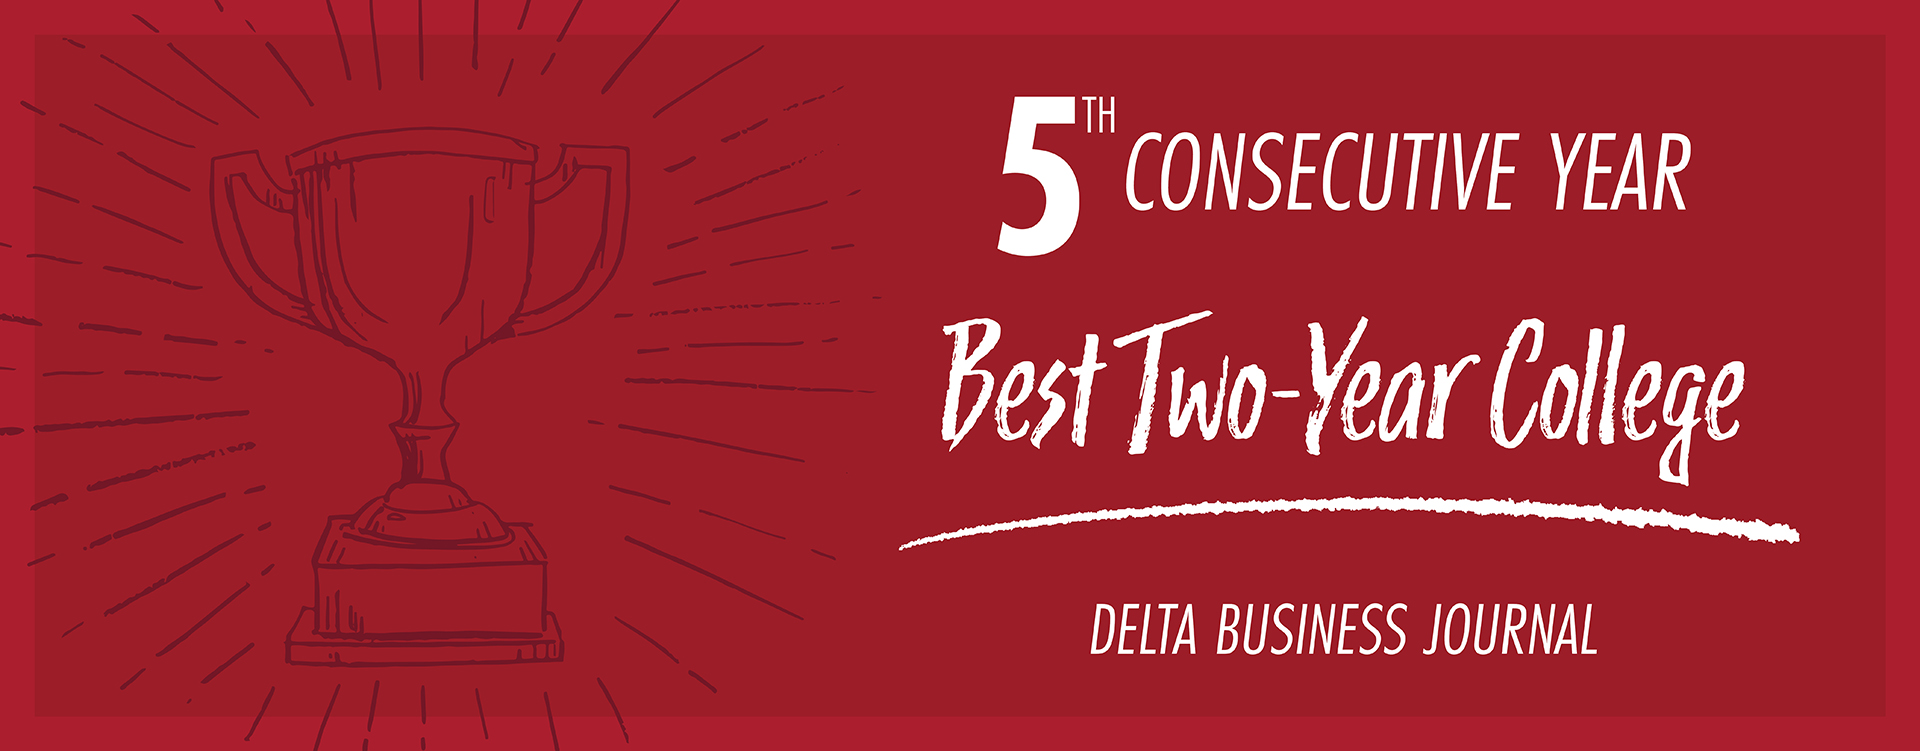 Best 2-Year College for the Fifth Consecutive Year